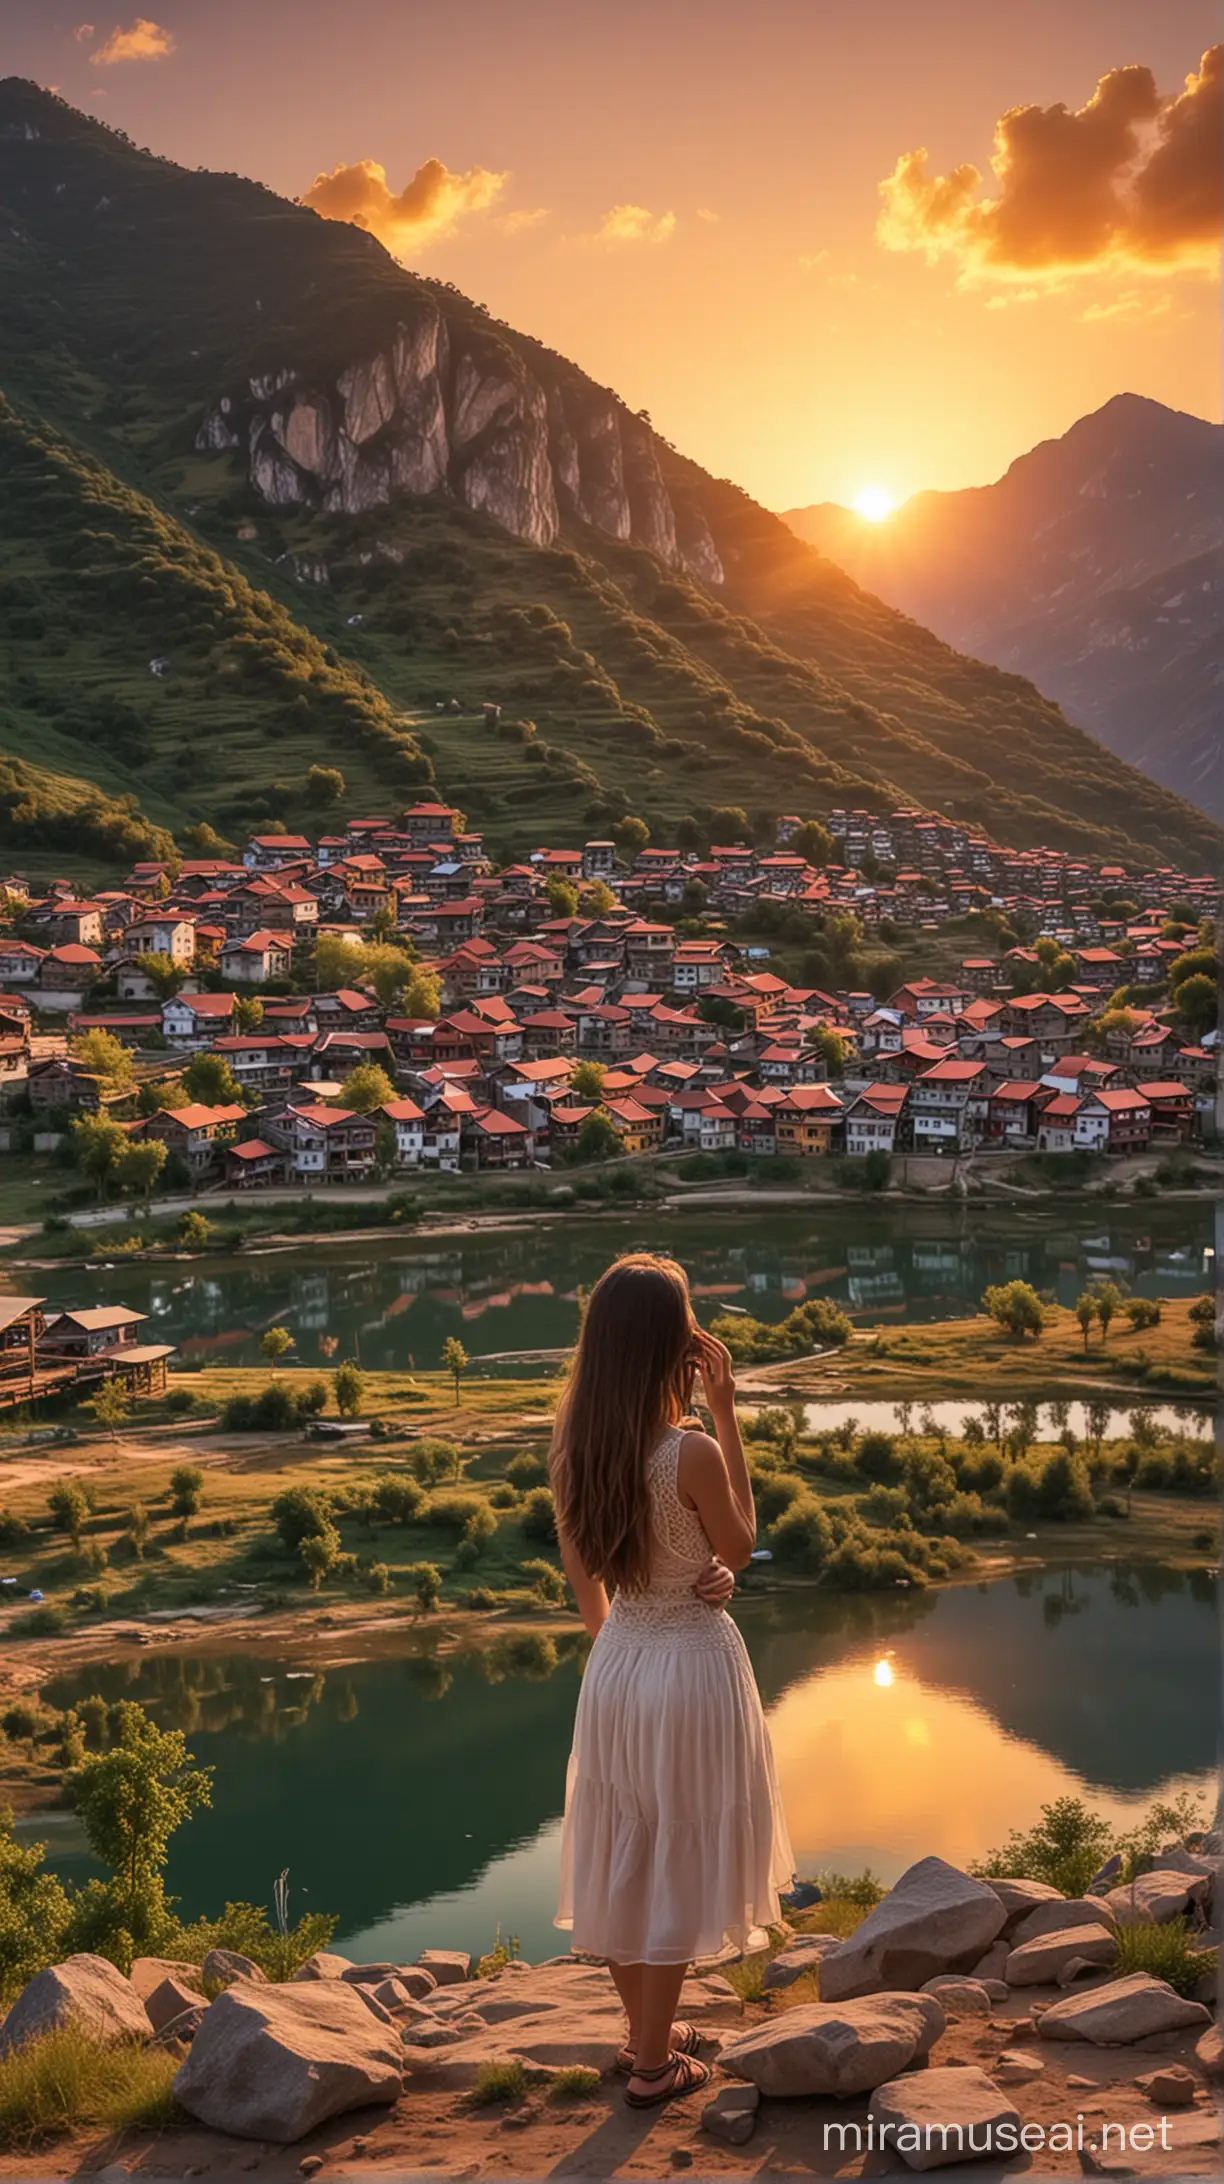 Scenic Mountain Sunset Serene Girl Overlooking Village by the Lake